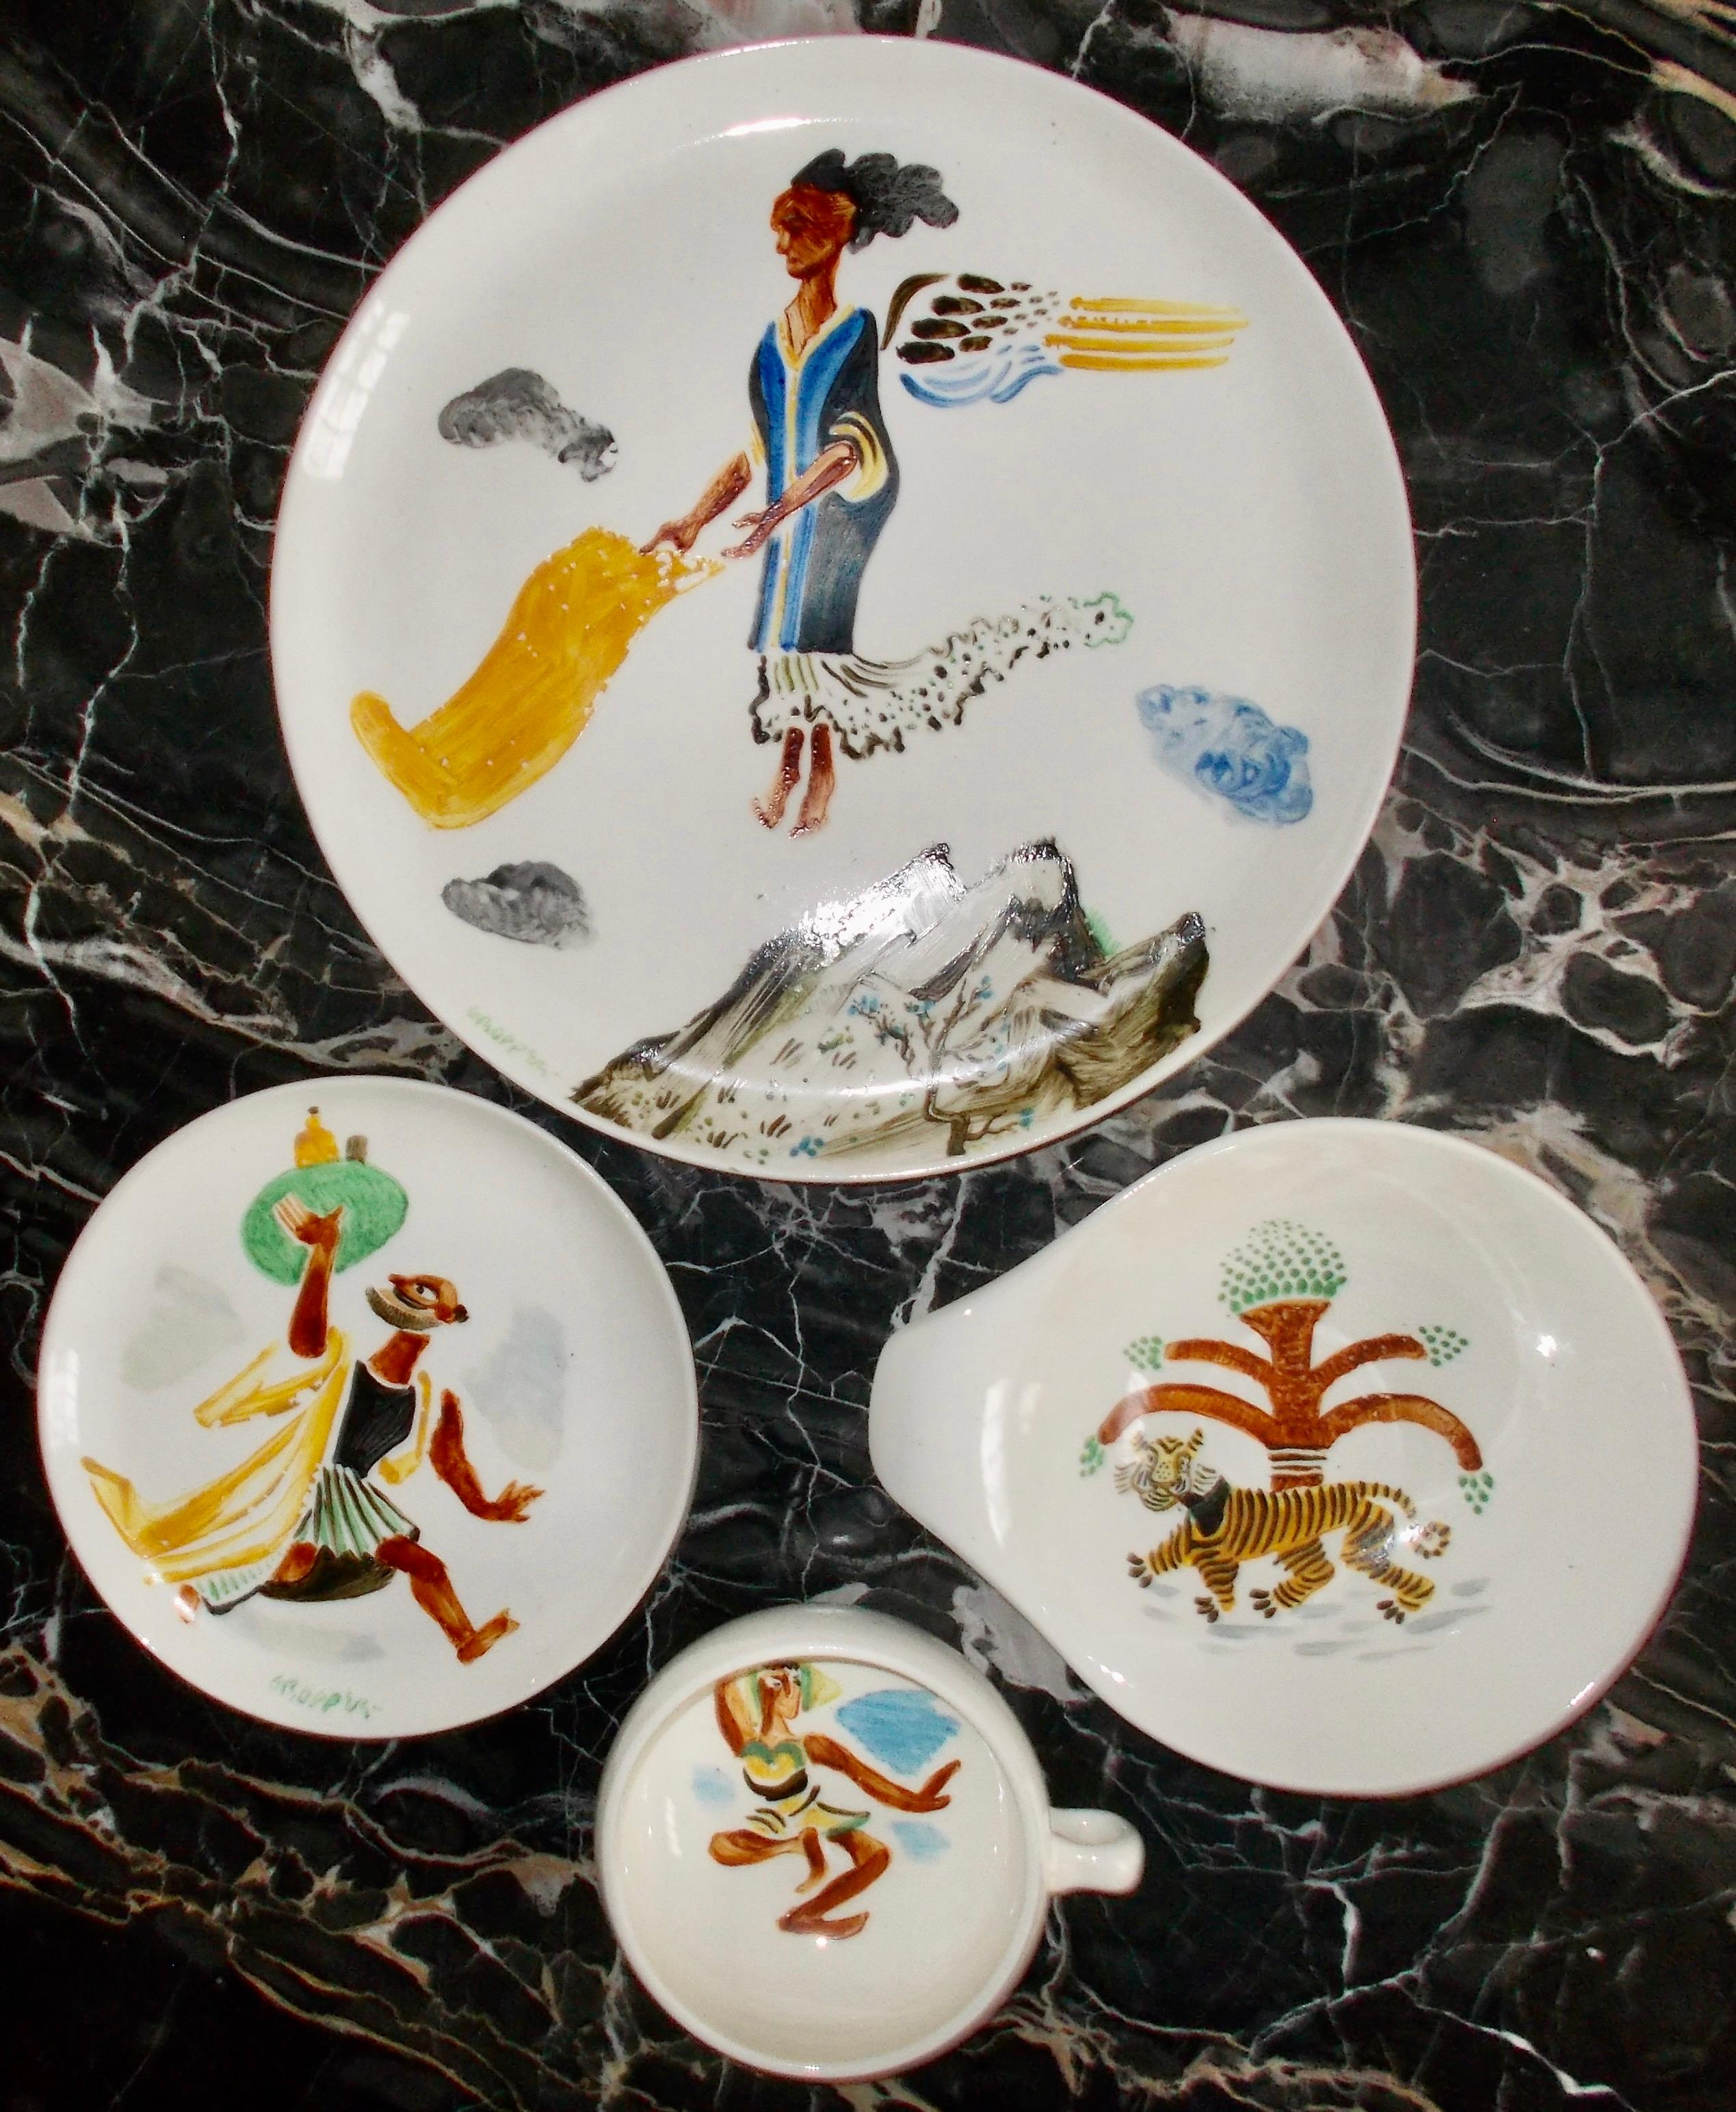 A set of four: cup, saucer, dinner plate and bowl, with paintings of mythological subjects on each by William Gropper. Russel Wright's 